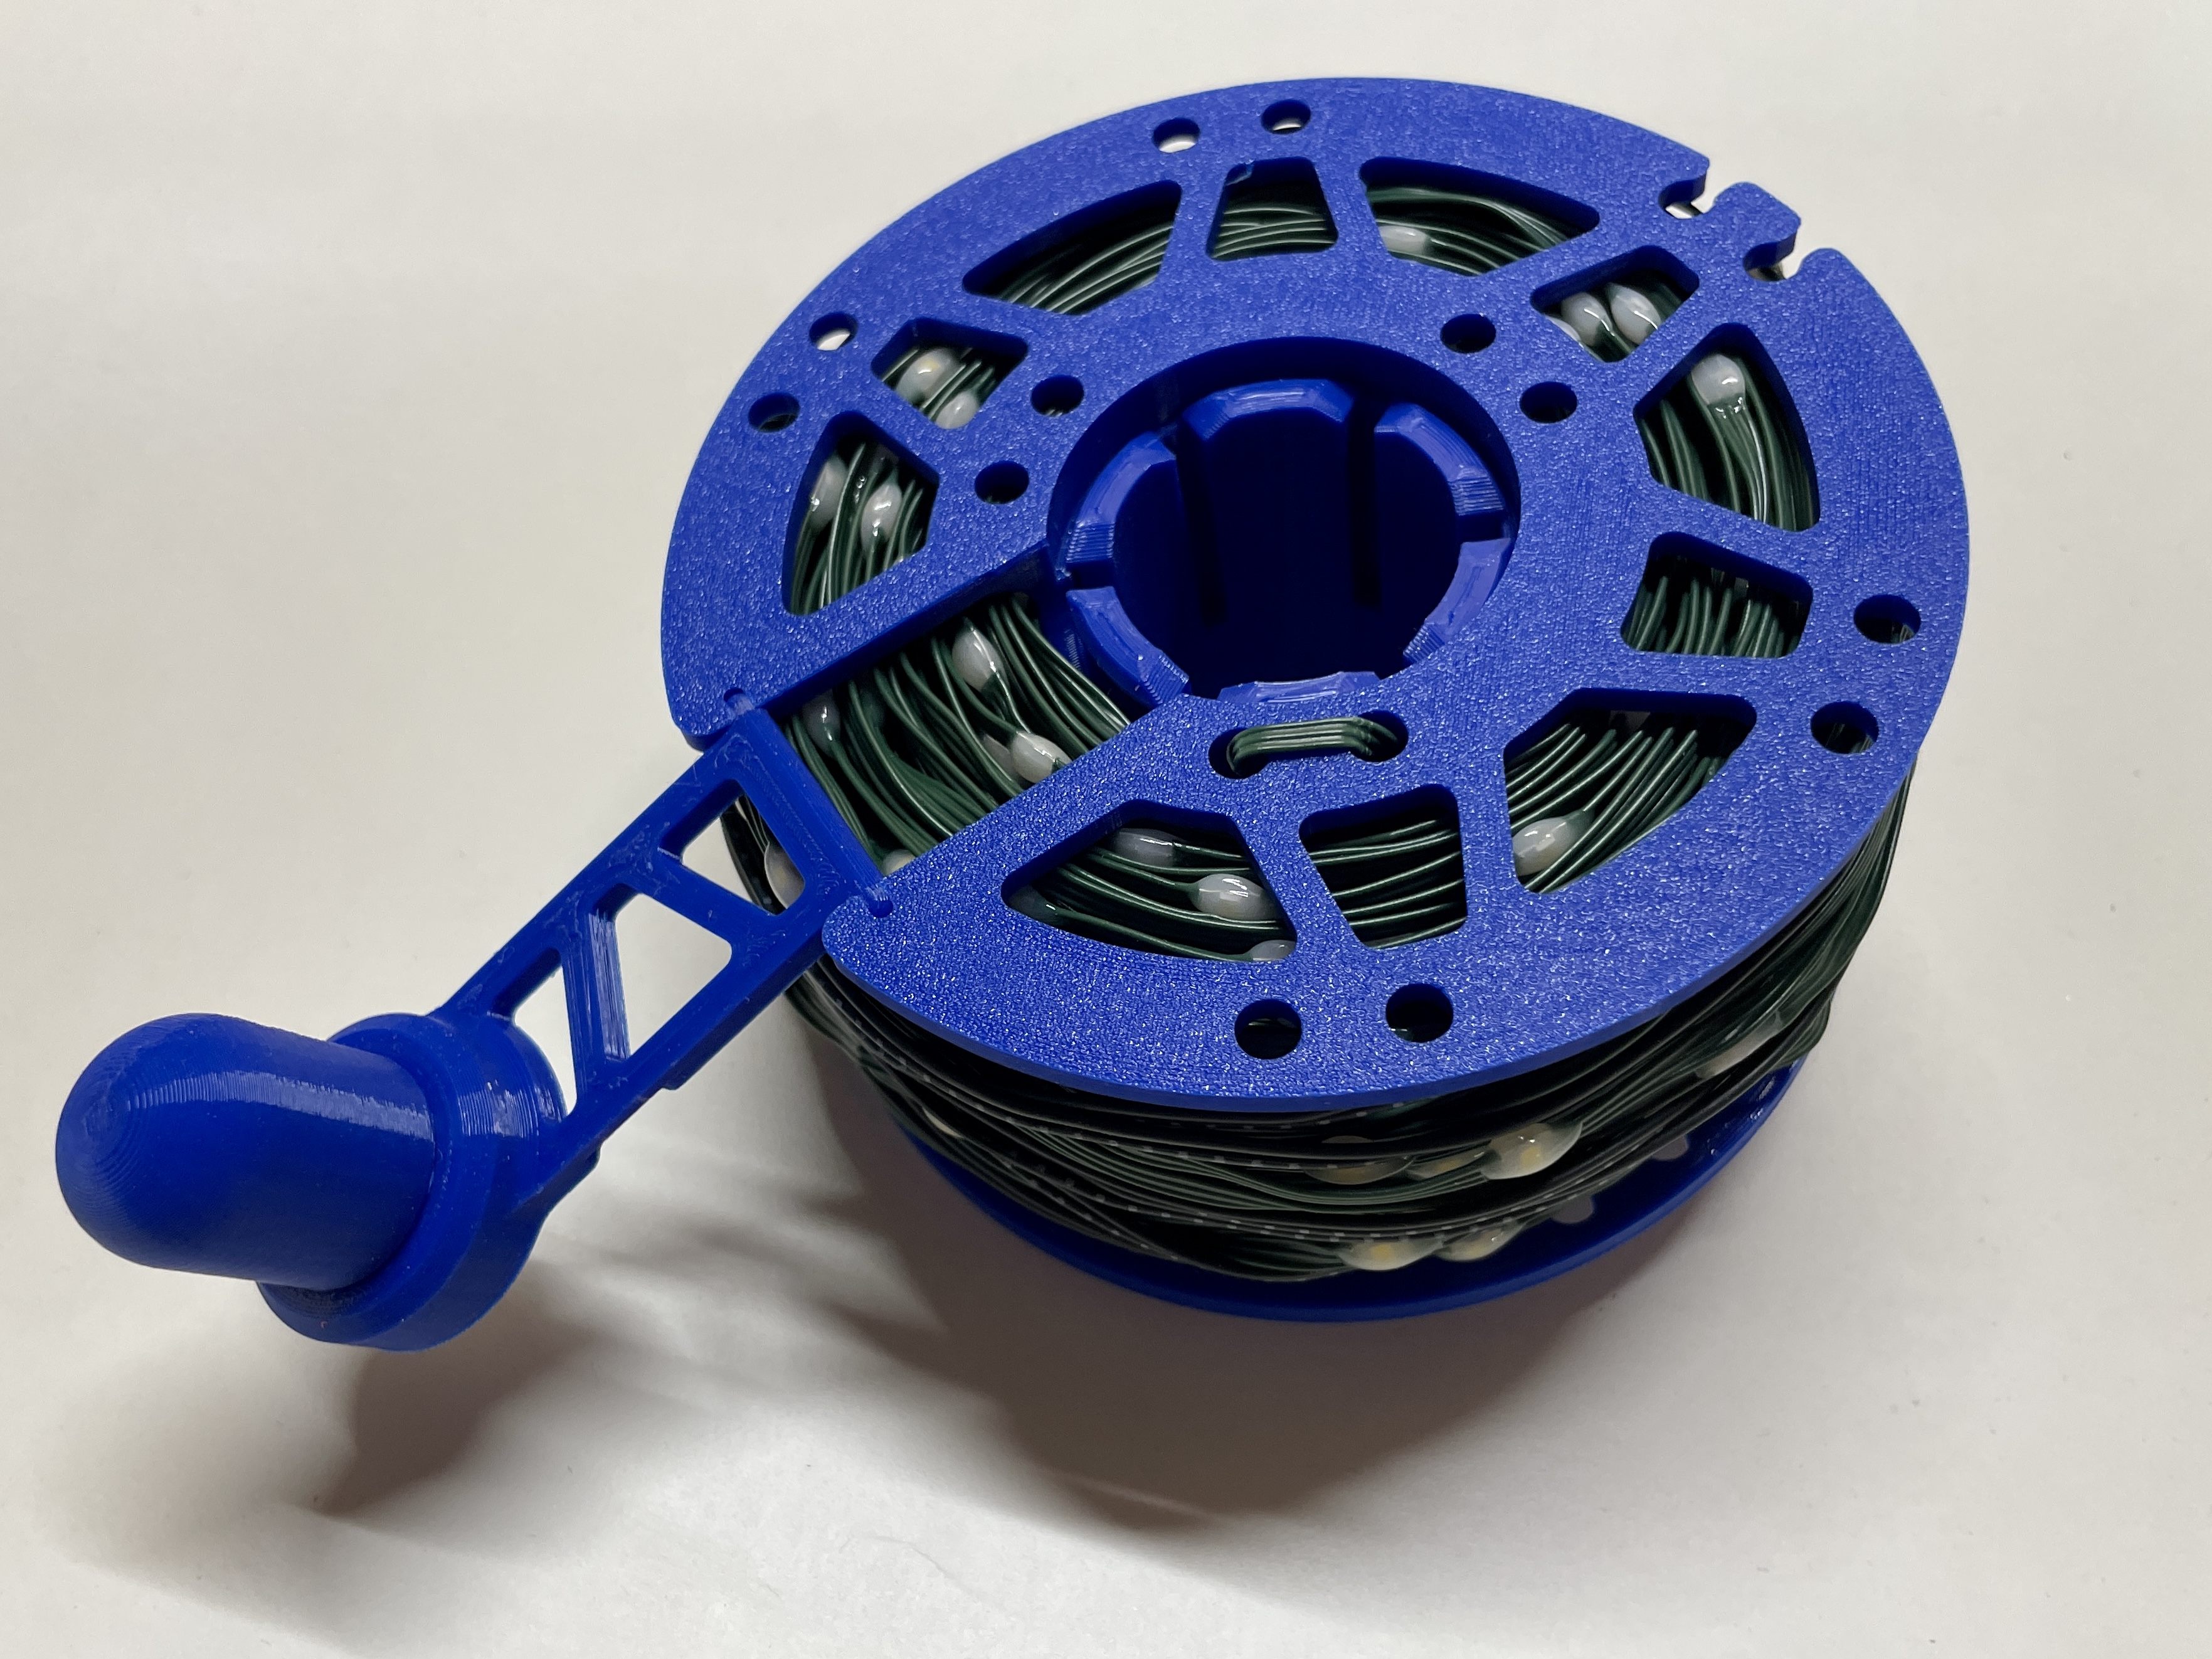 Compact Cable Reel with Integrated Folding Handle by Fulcrum Design, Download free STL model